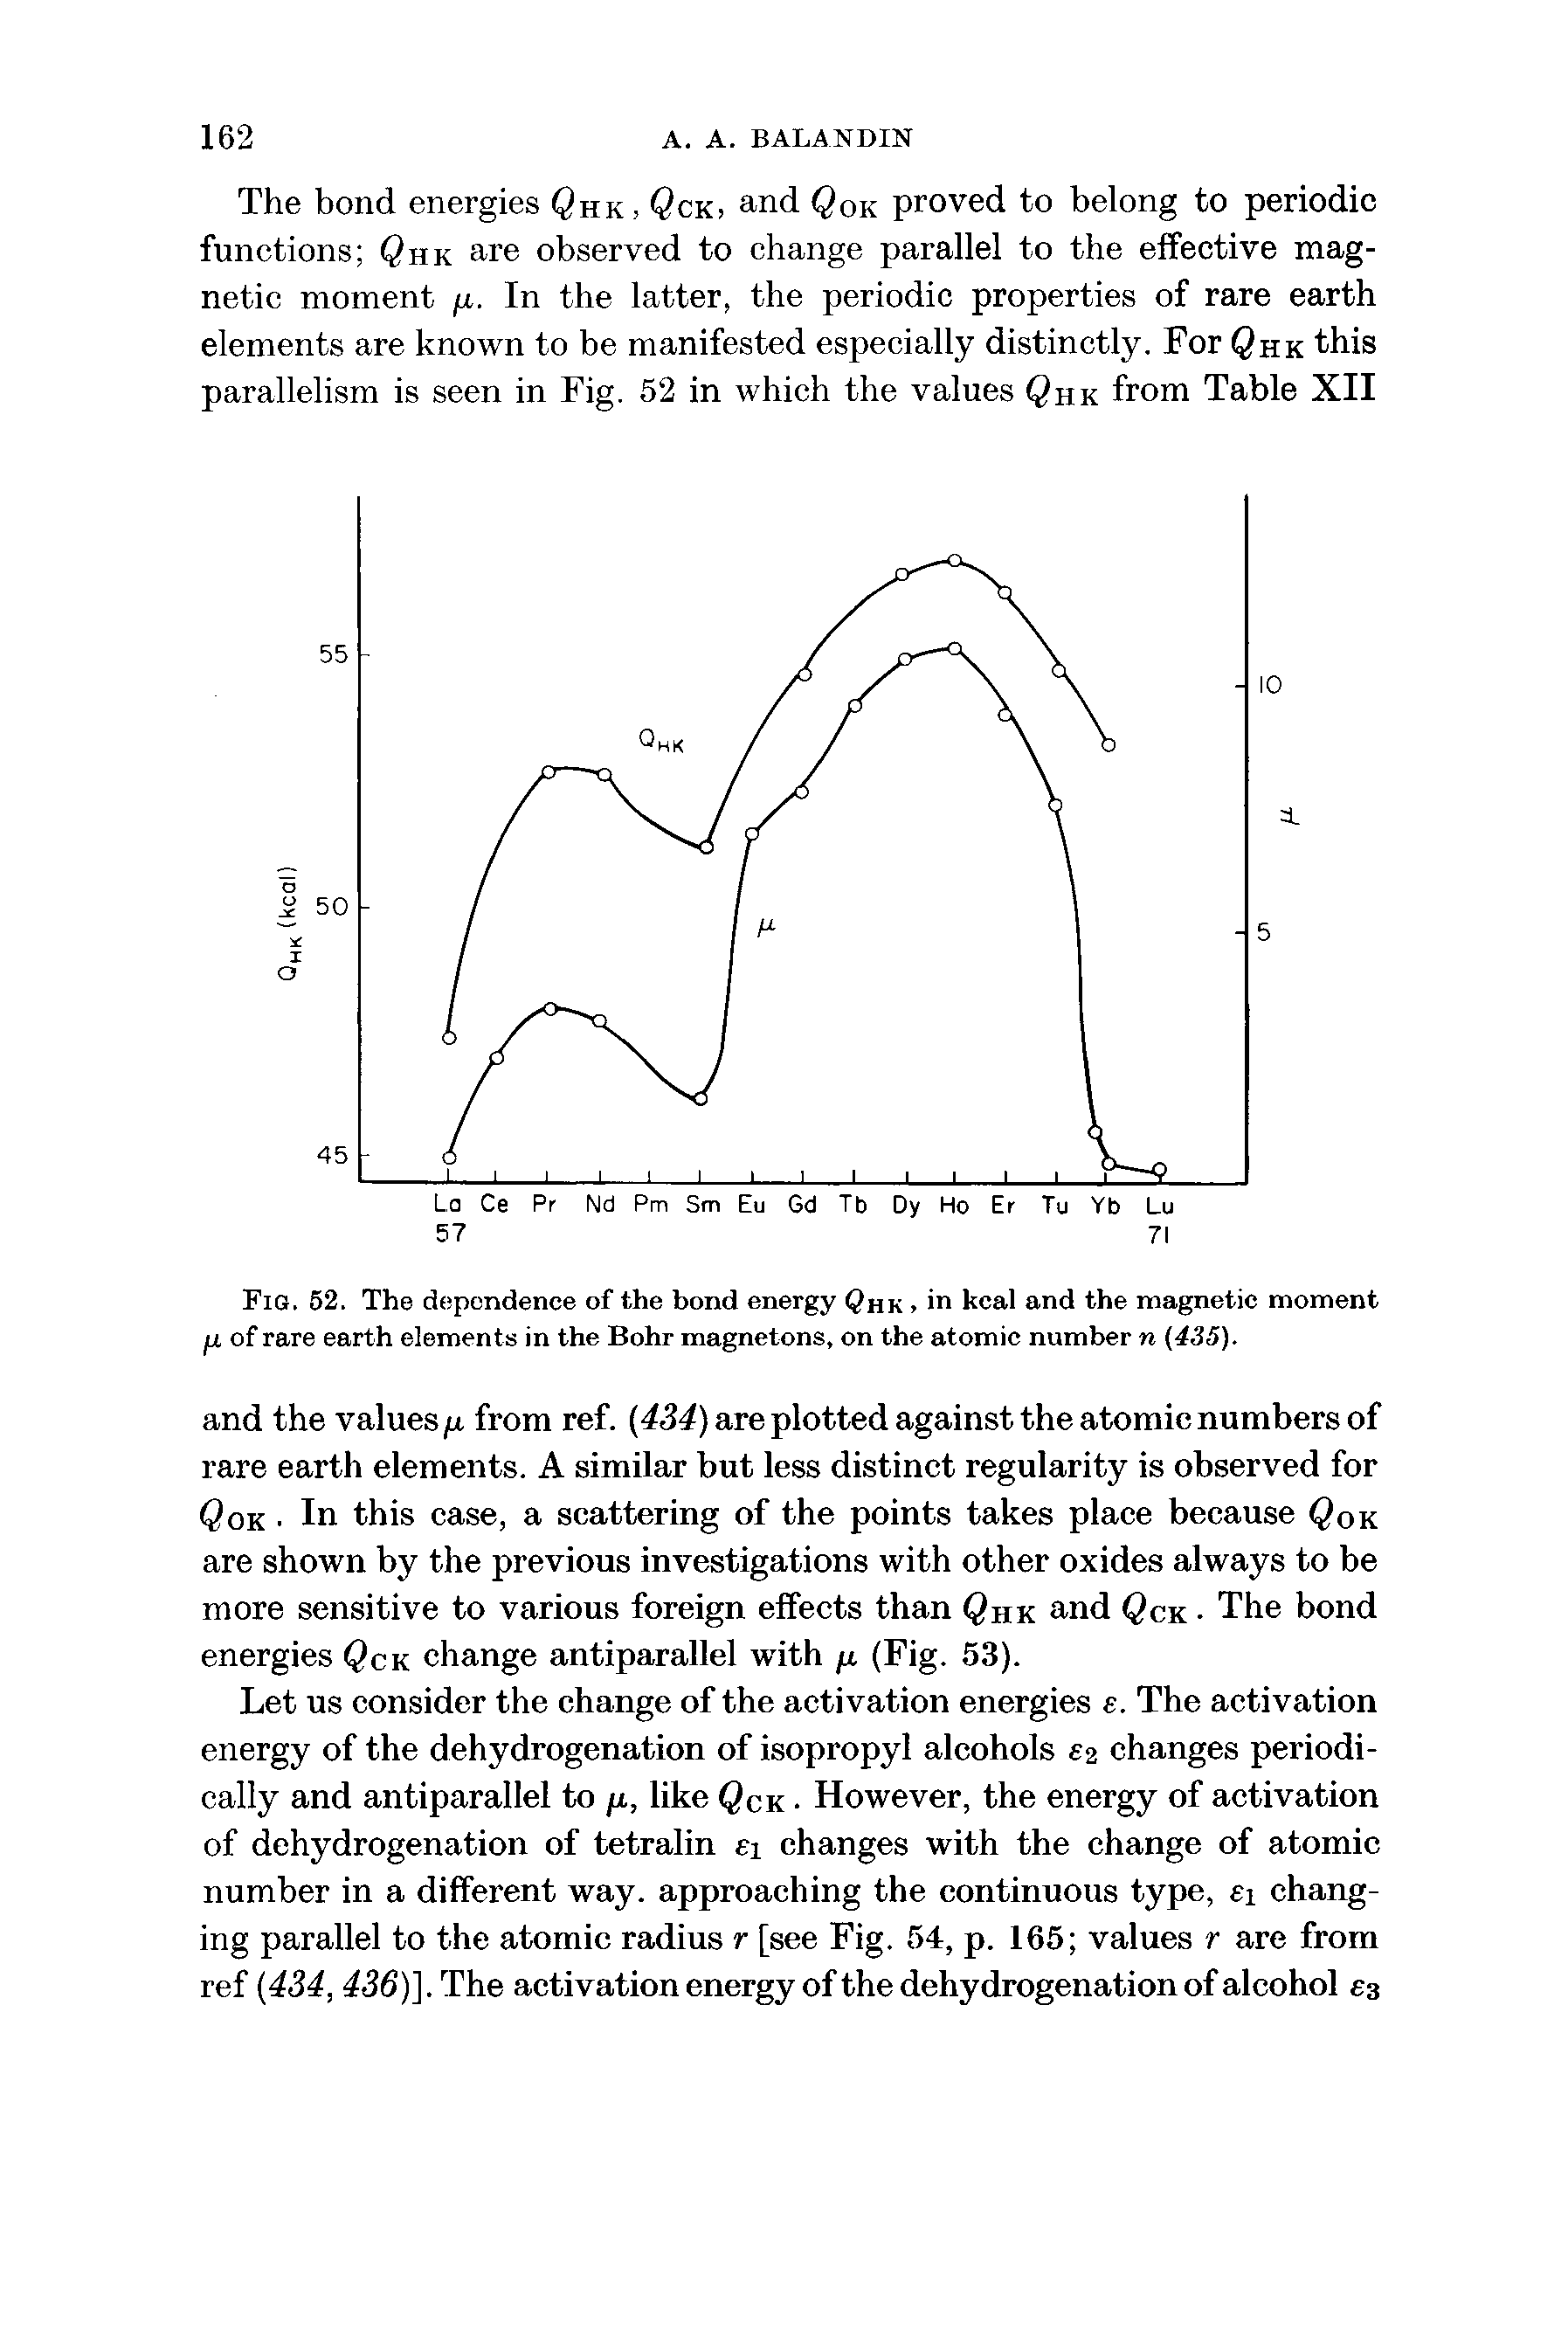 Fig. 52. The dfipondence of the bond energy Qhk, in kcal and the magnetic moment jU of rare earth elements in the Bohr magnetons, on the atomic number n (435).